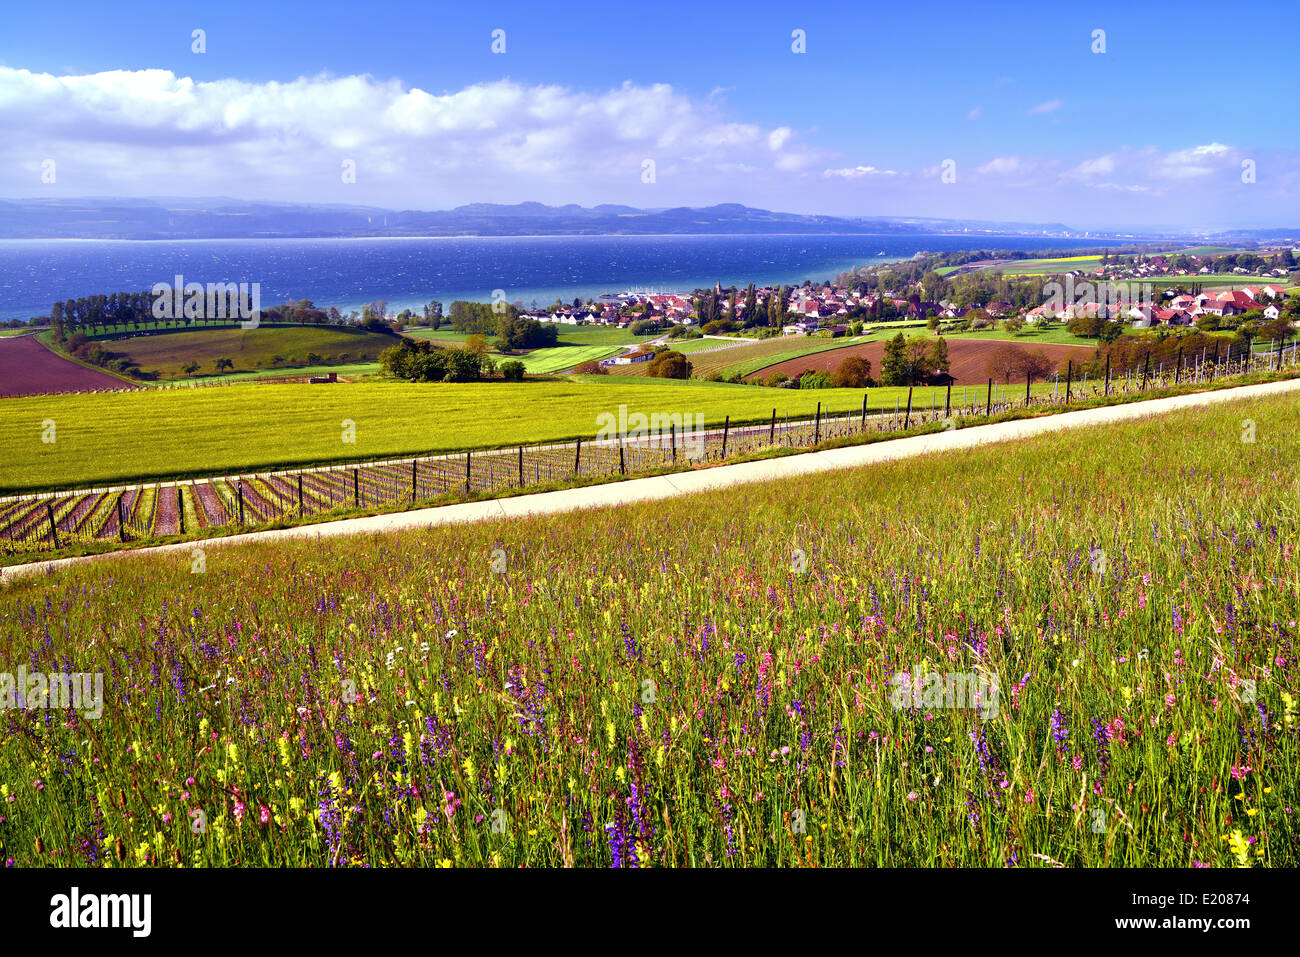 Flower meadow and vineyard on Lake Neuchâtel, near Concise, Yverdon-les-Bains, Canton of Vaud, Switzerland Stock Photo